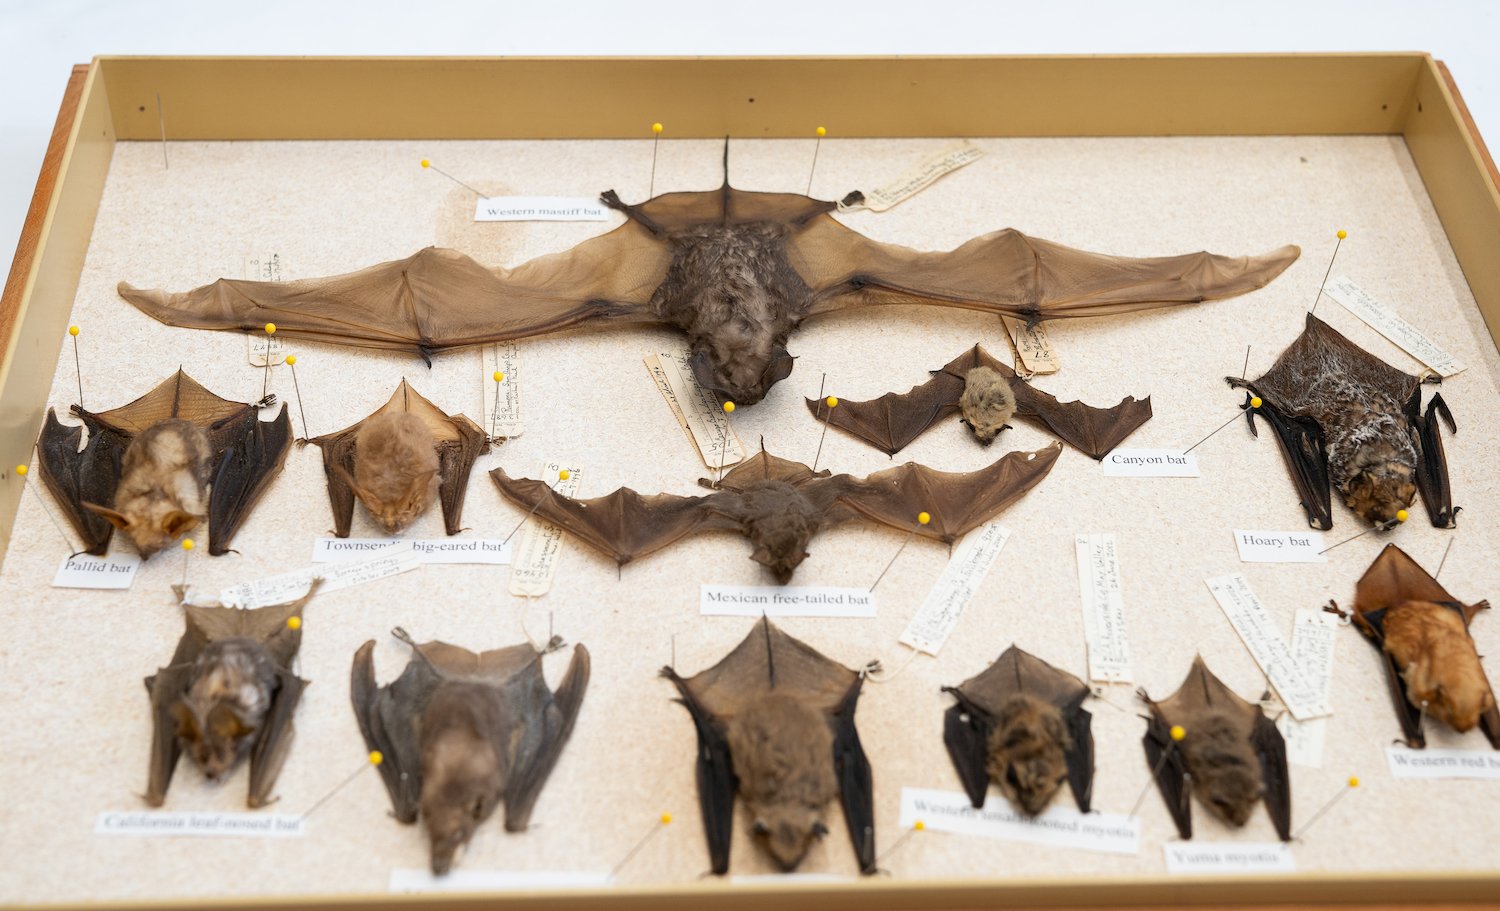 Preserved bats are on display at the San Diego Natural History Museum